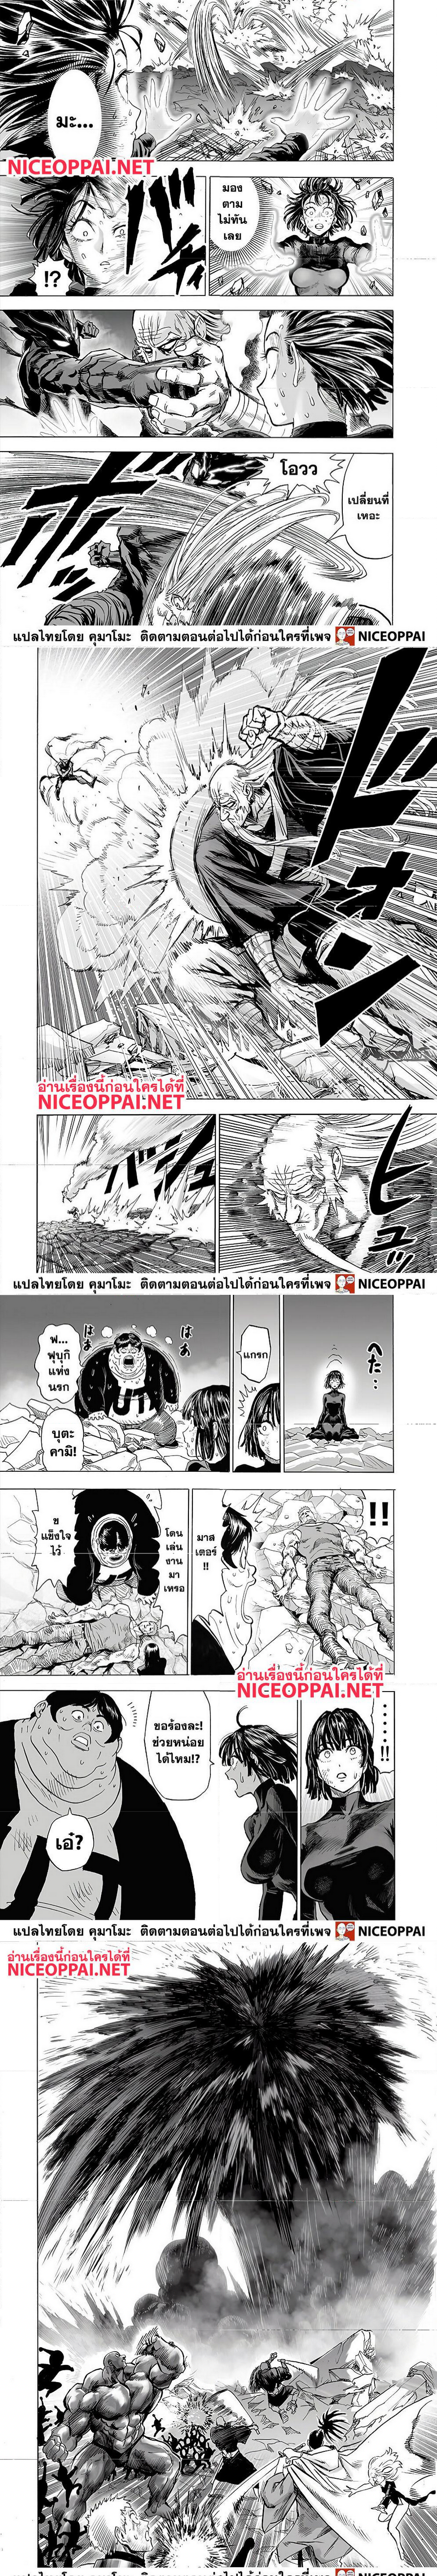 One Punch Man147 (2)